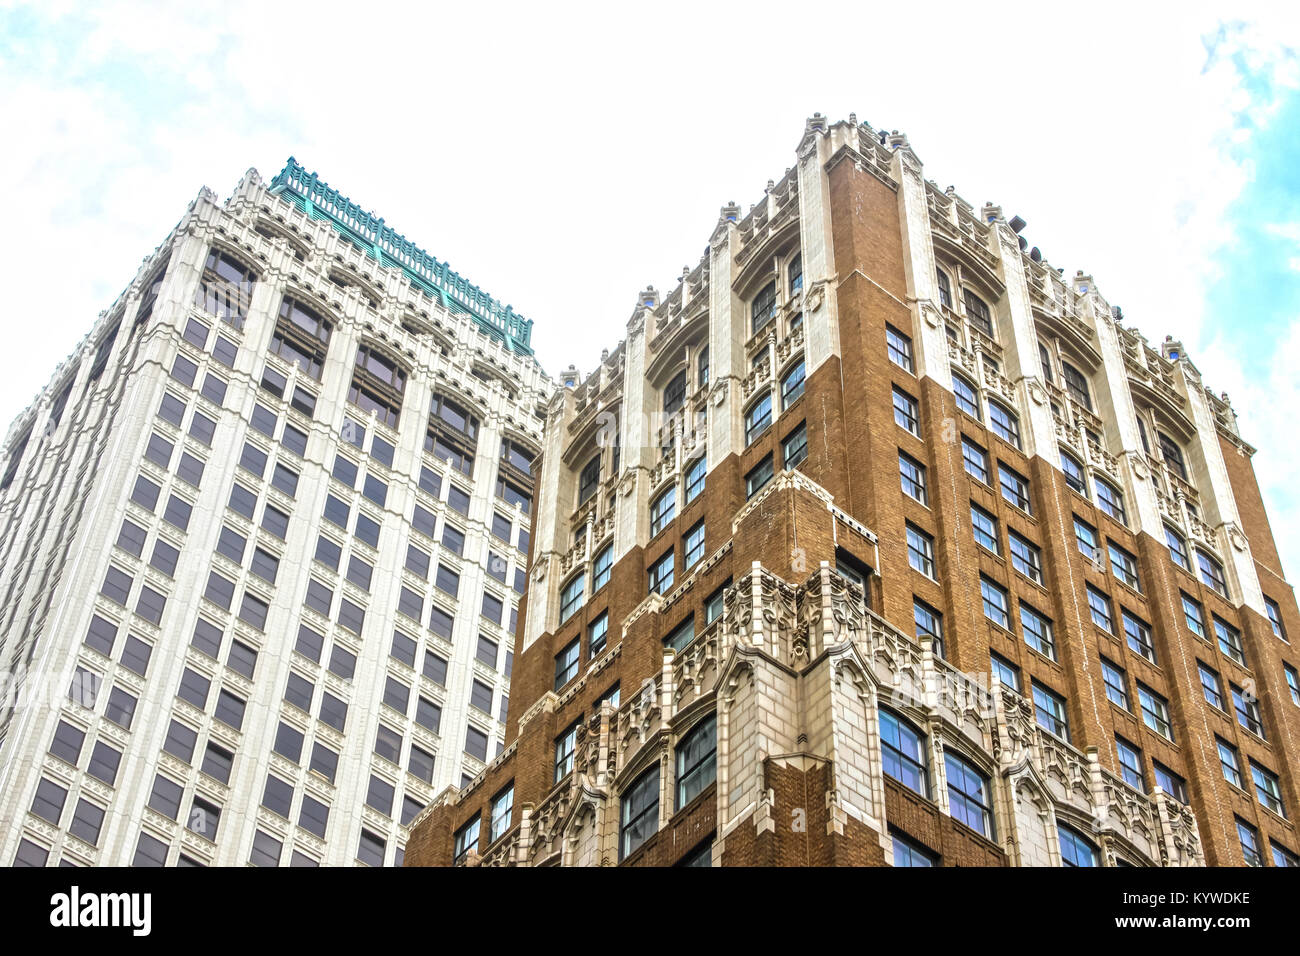 Angled view up at ornate old tall office buildings from street level Stock Photo